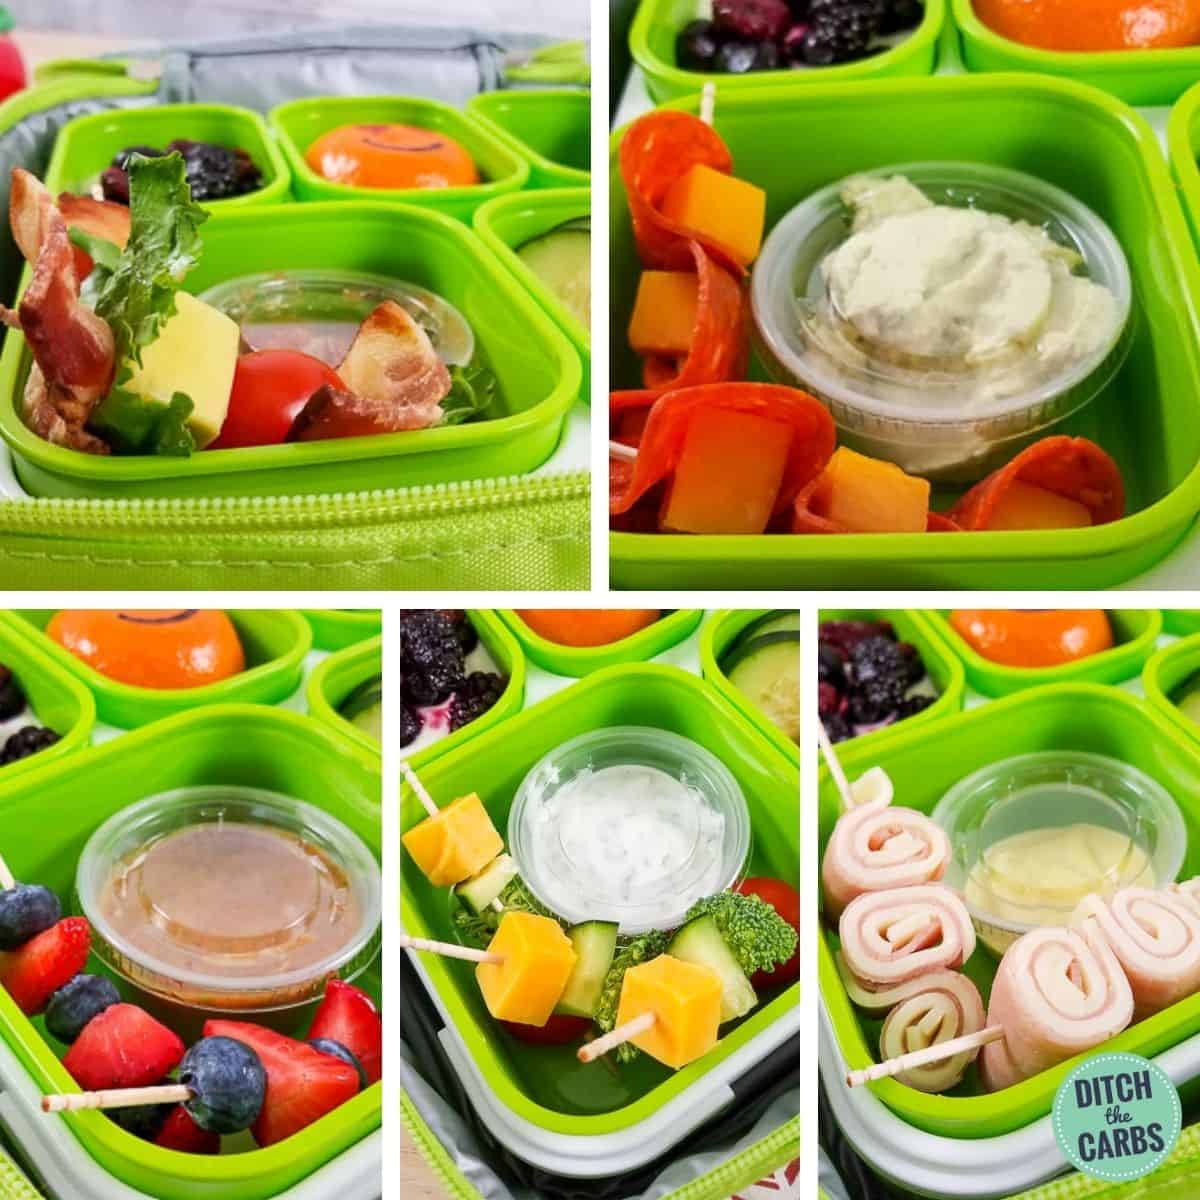 When sandwiches flop, pack healthy dips for school lunch.